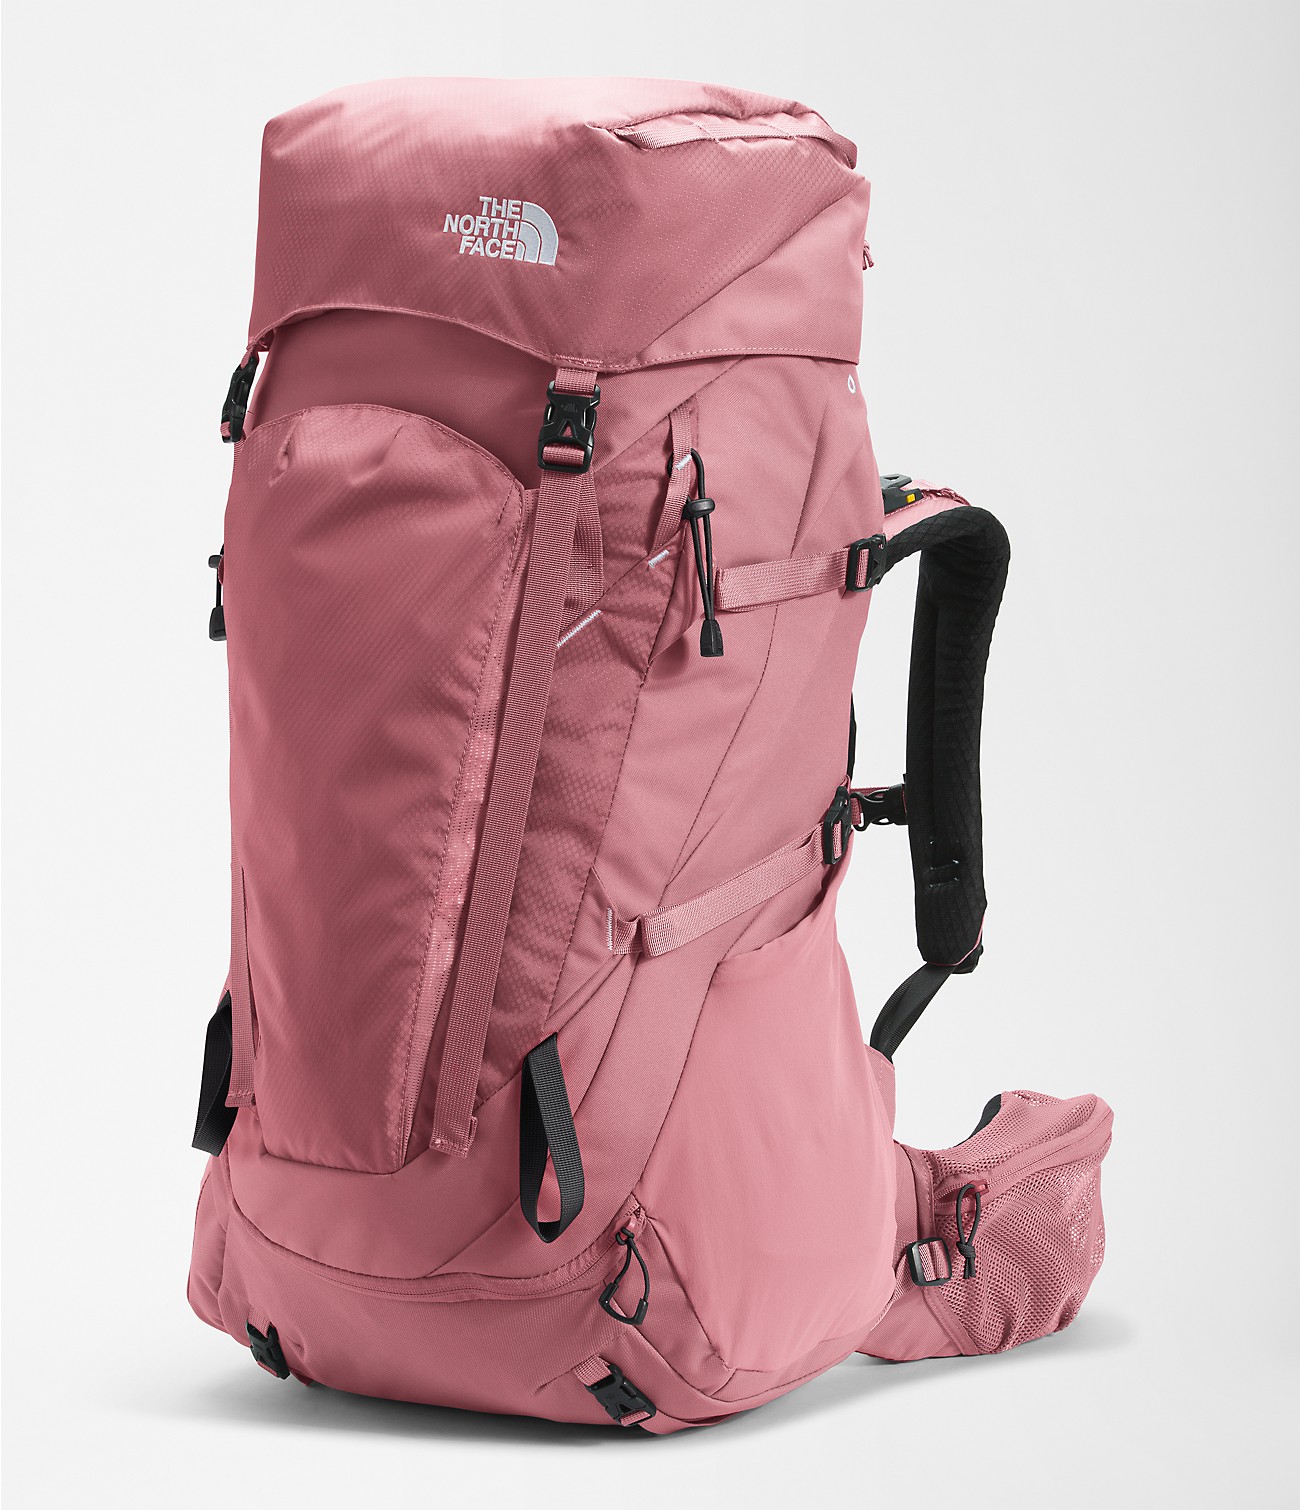 North Face Terra 55 Best women's hiking backpack